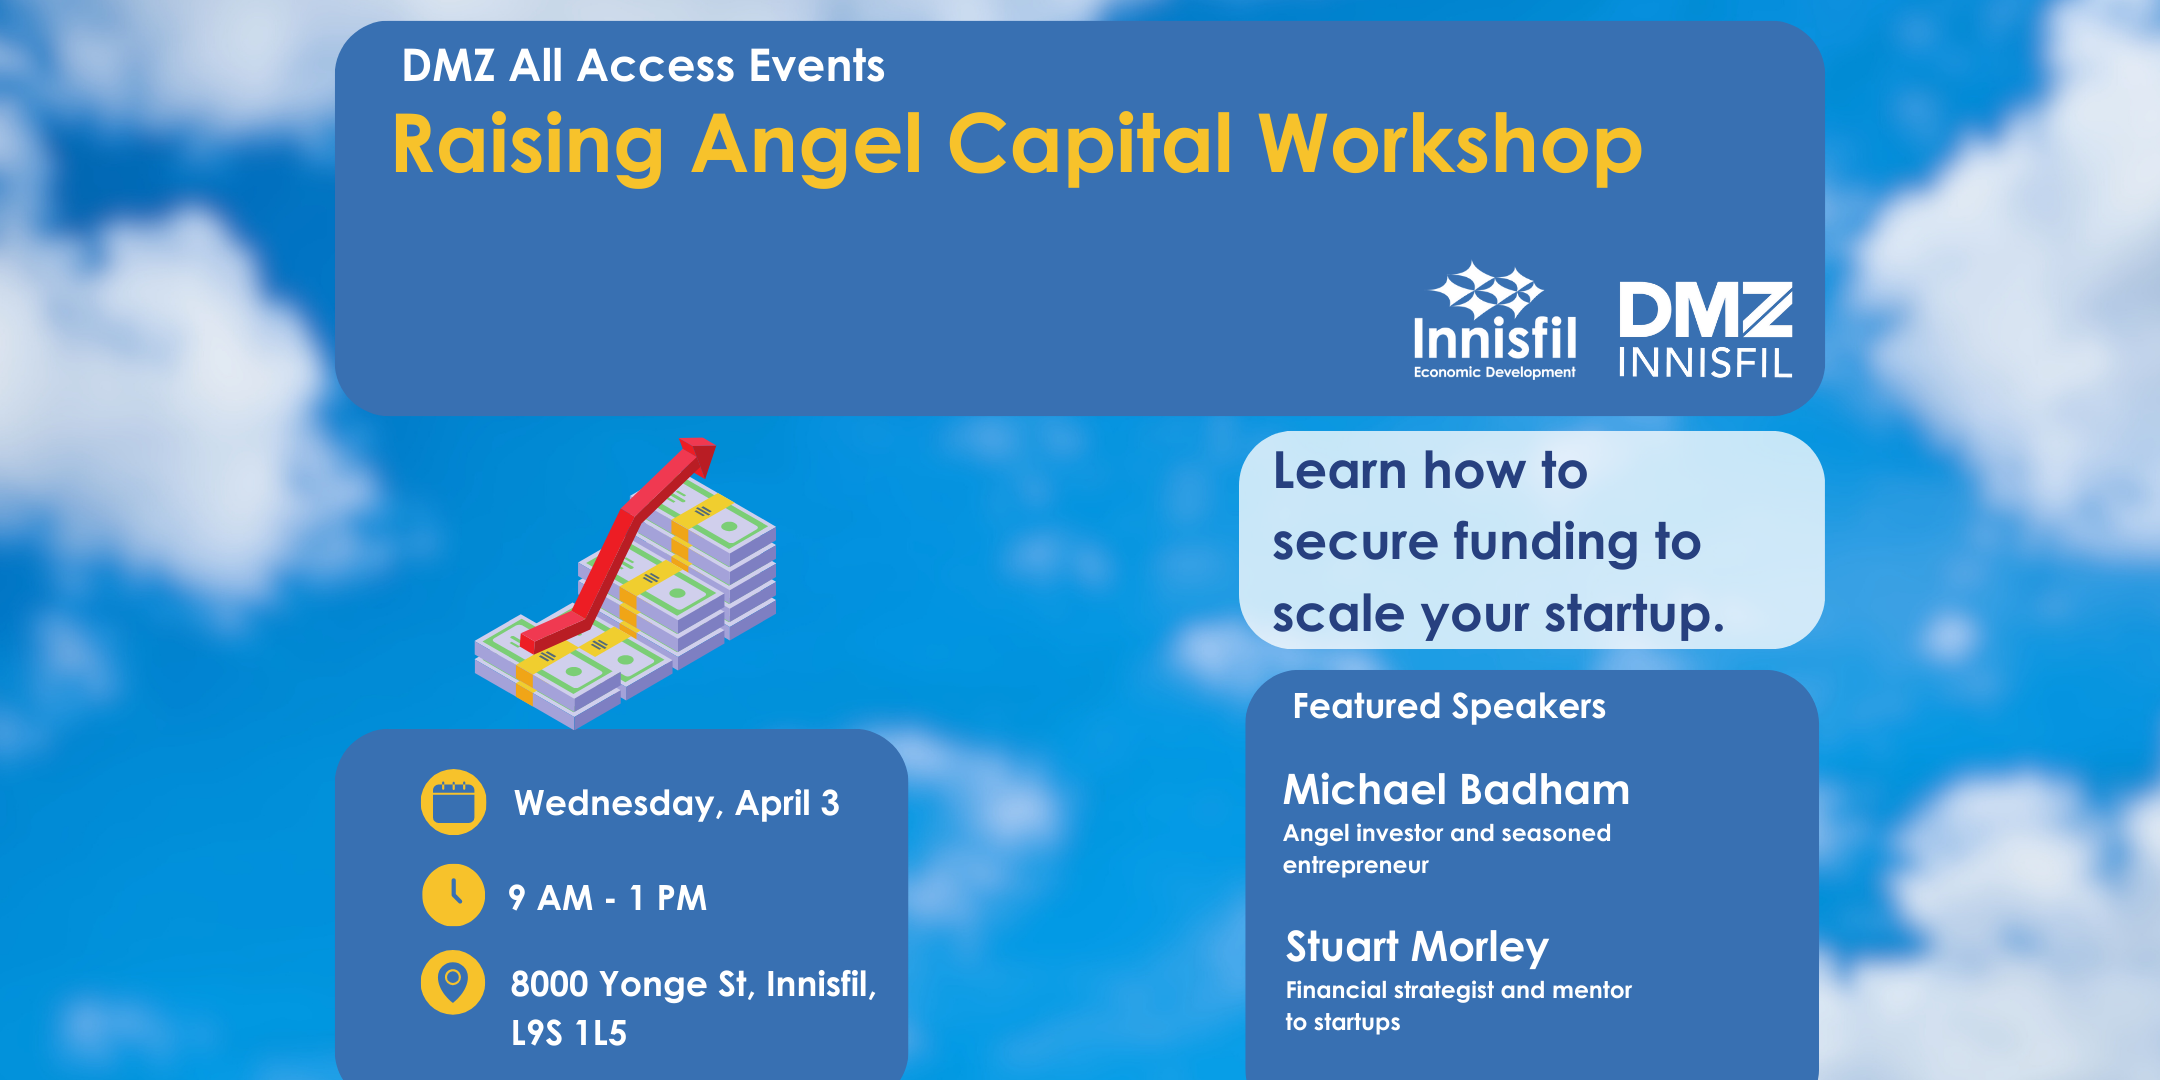 A poster for Raising Angel Capital Workshop - DMZ Innisfil All Access Events